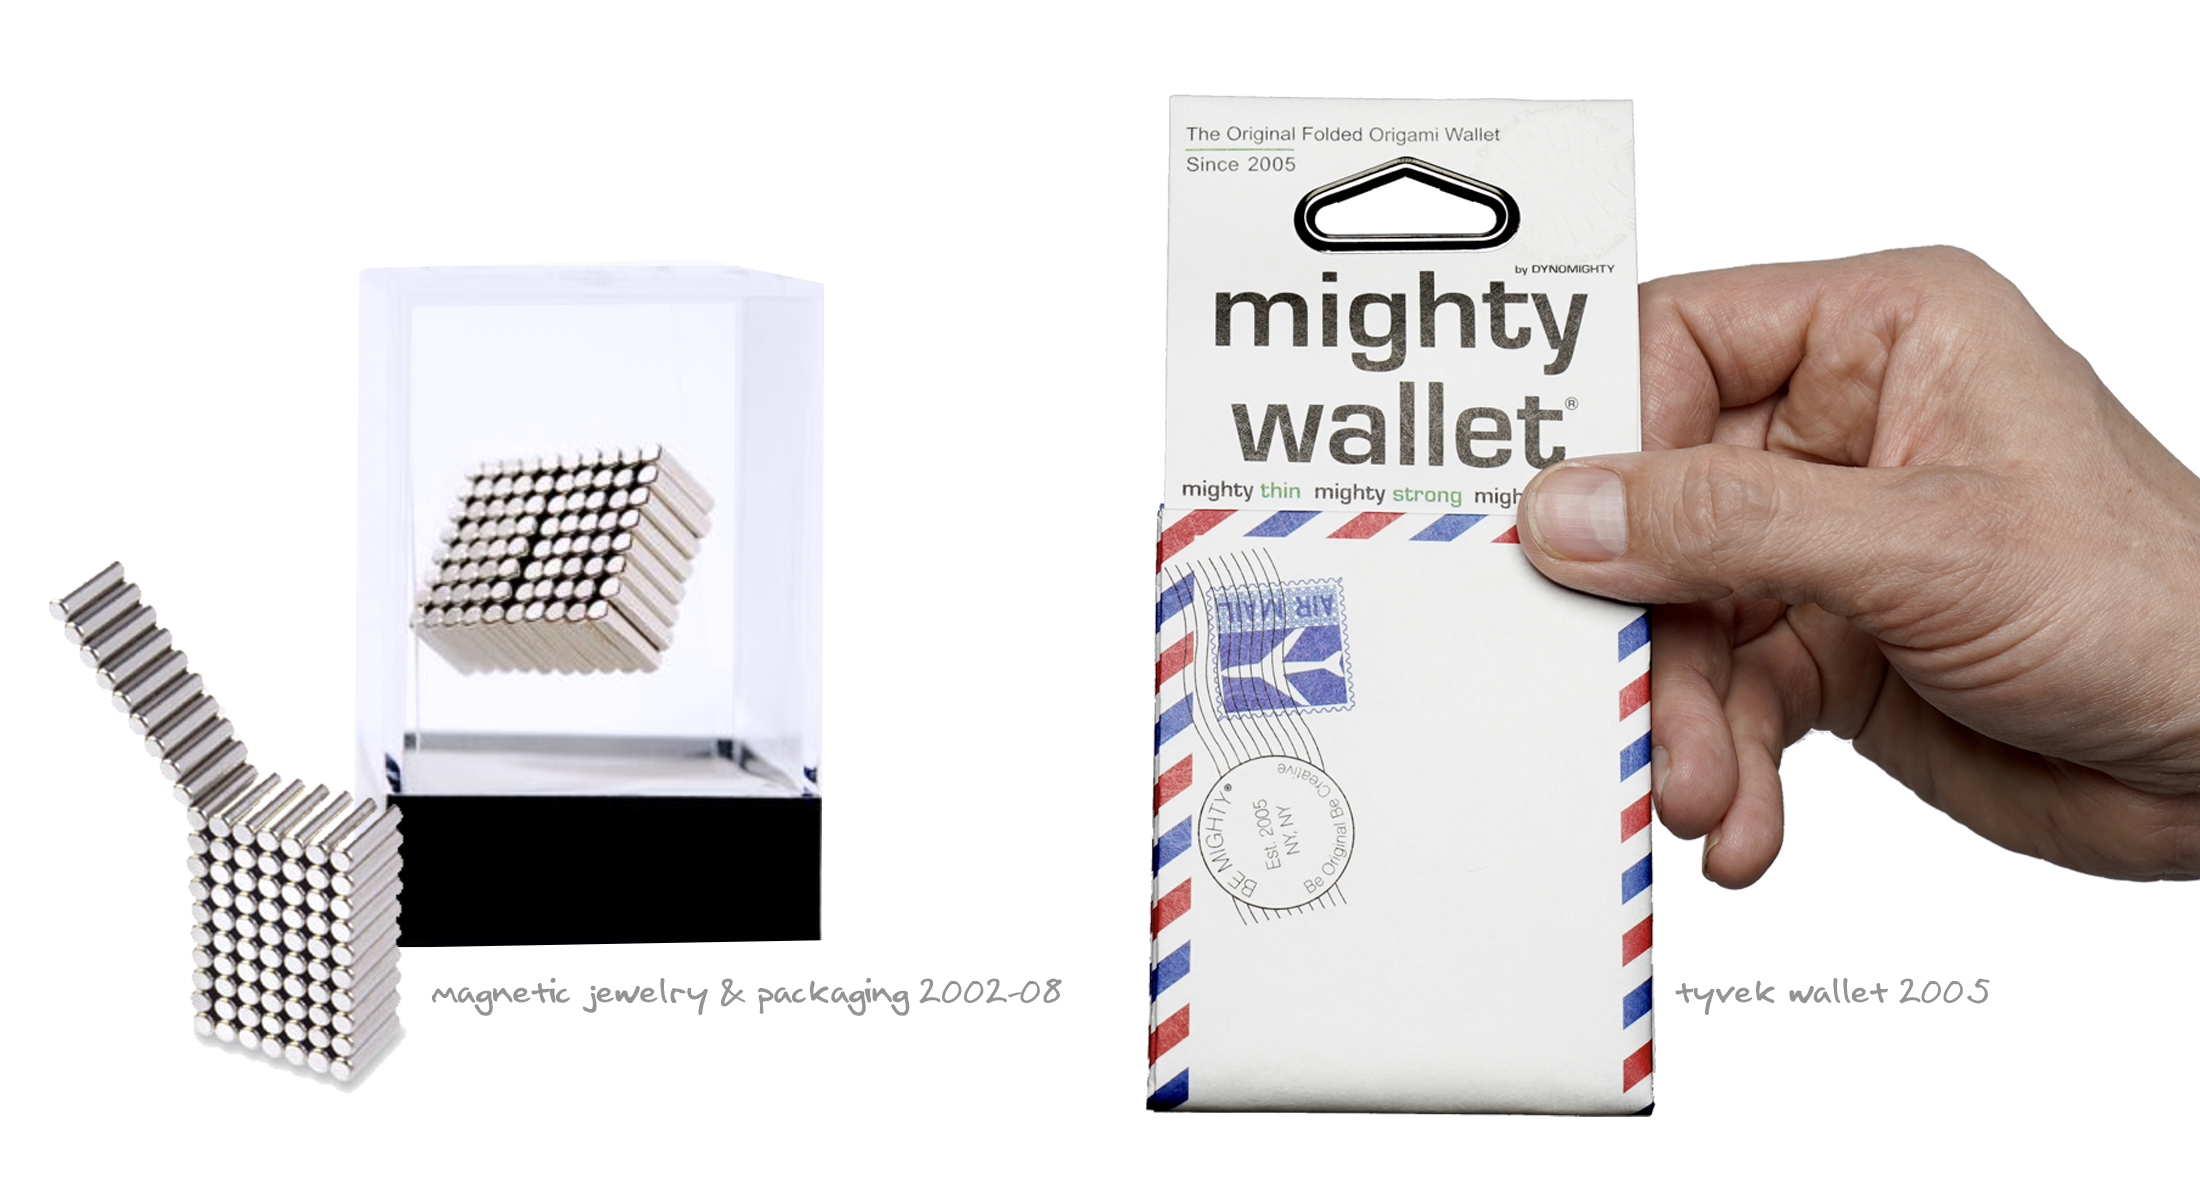 Design vs Invention - The 1st Tyvek Wallet and Link-less Magnetic play jewelry